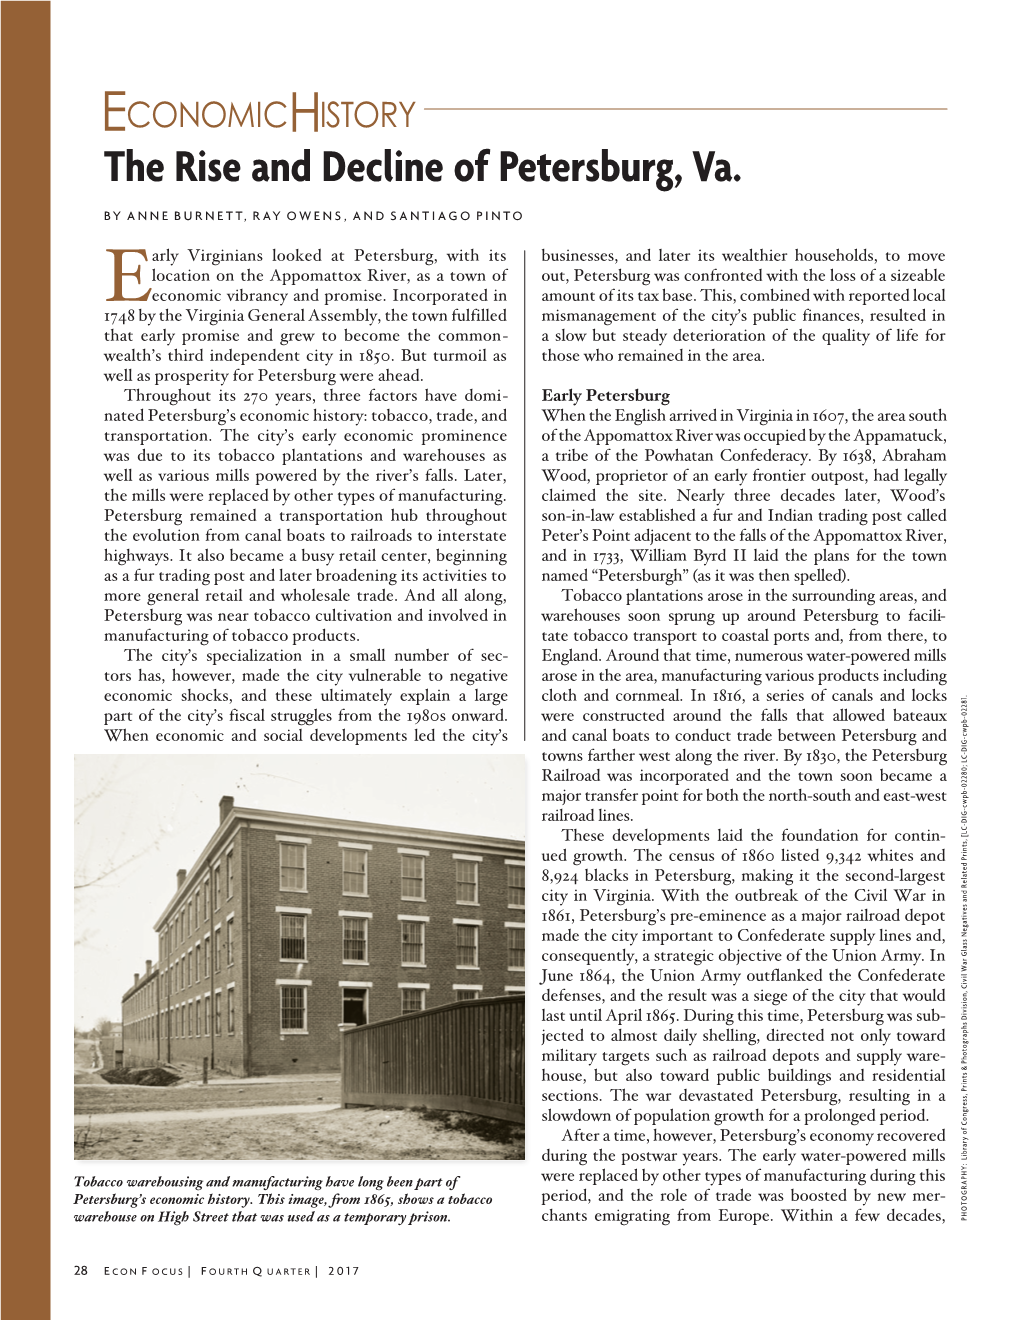 The Rise and Decline of Petersburg, Va